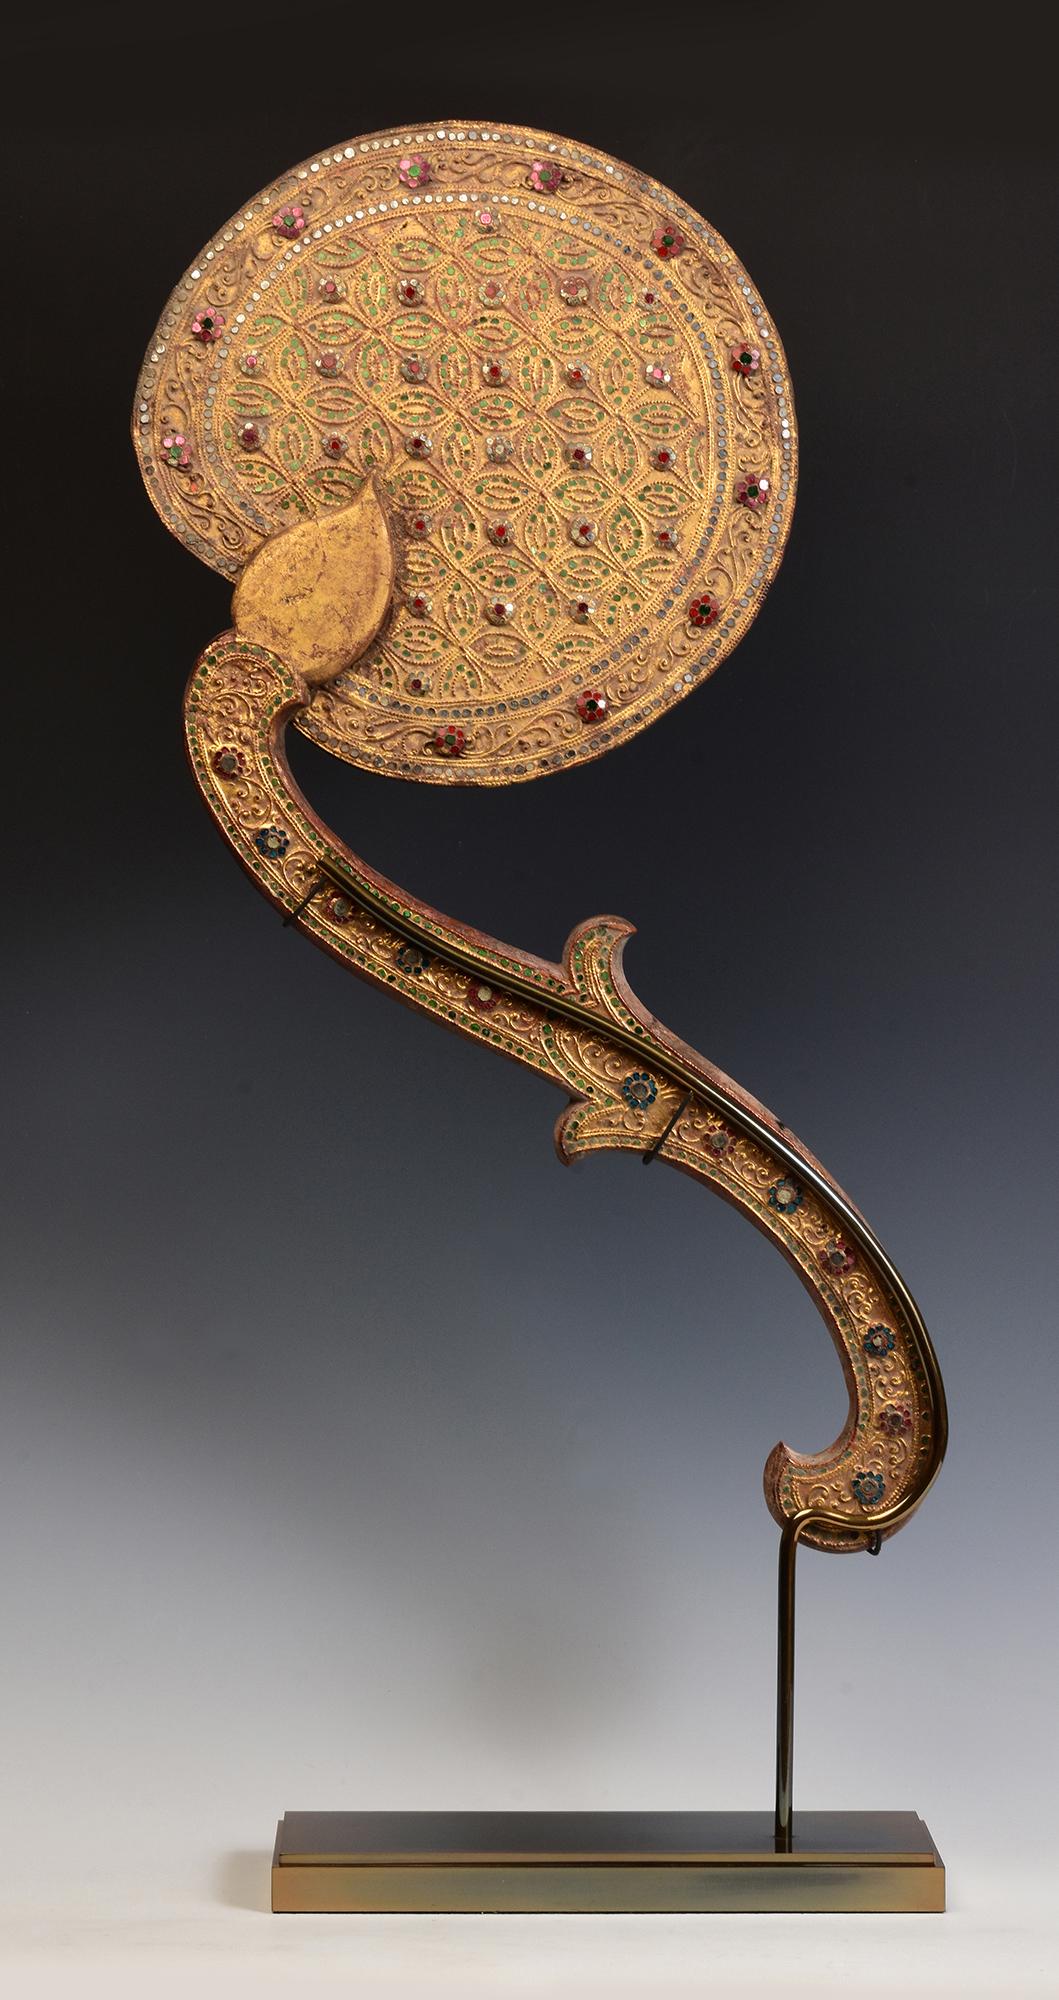 19th Century, Mandalay, Antique Burmese Wooden Fan with Gilded Gold and Glass For Sale 5